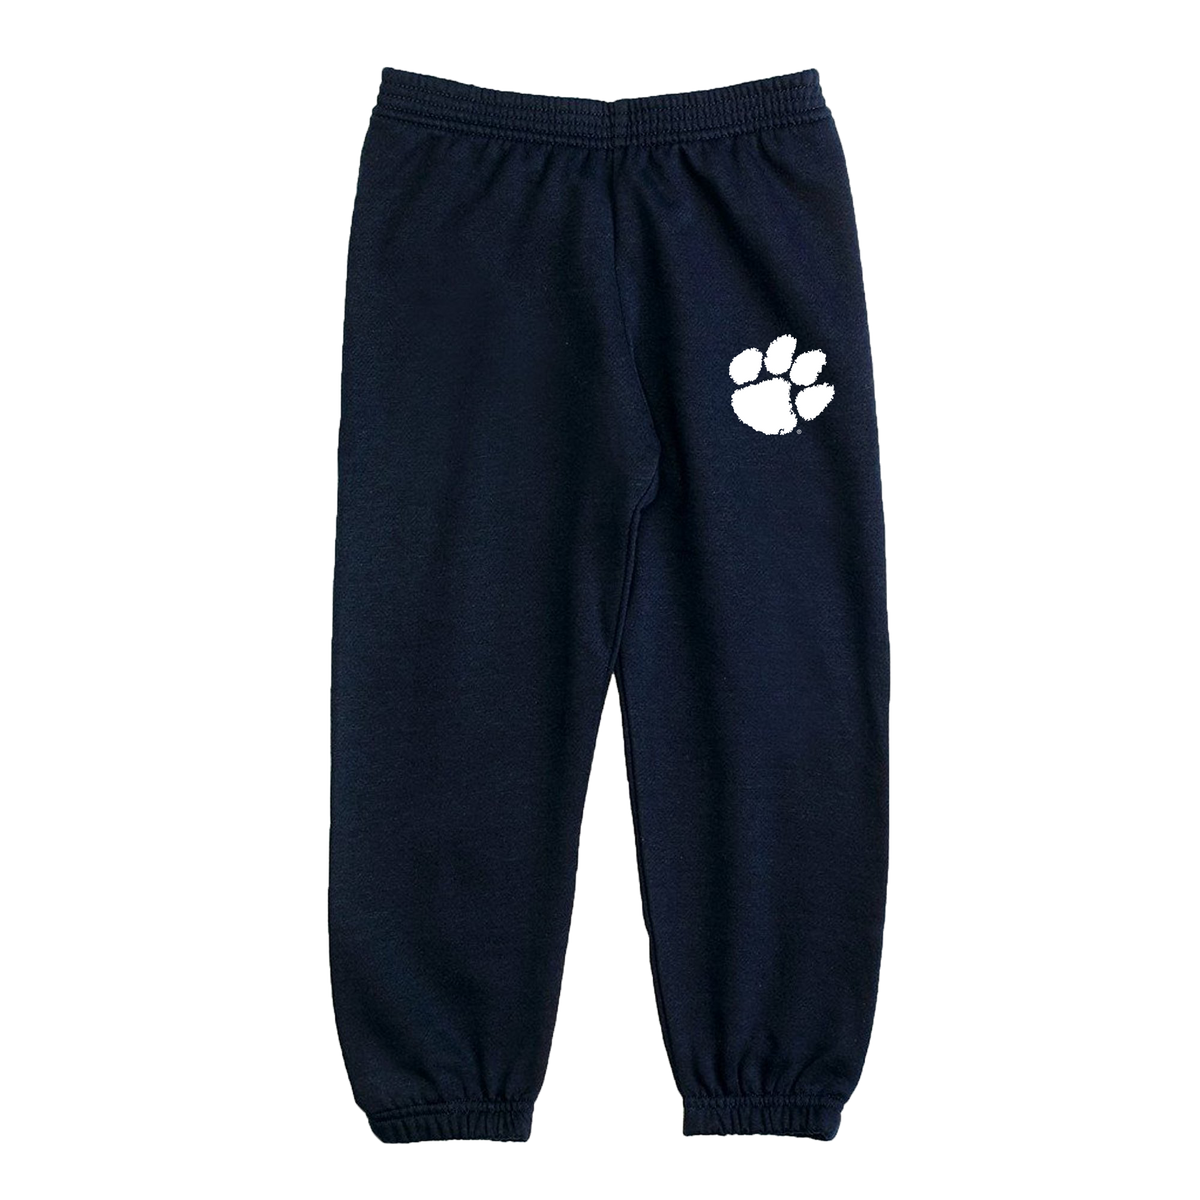 Clemson Sweatpants With Paw on Left Thigh | Toddler - Navy